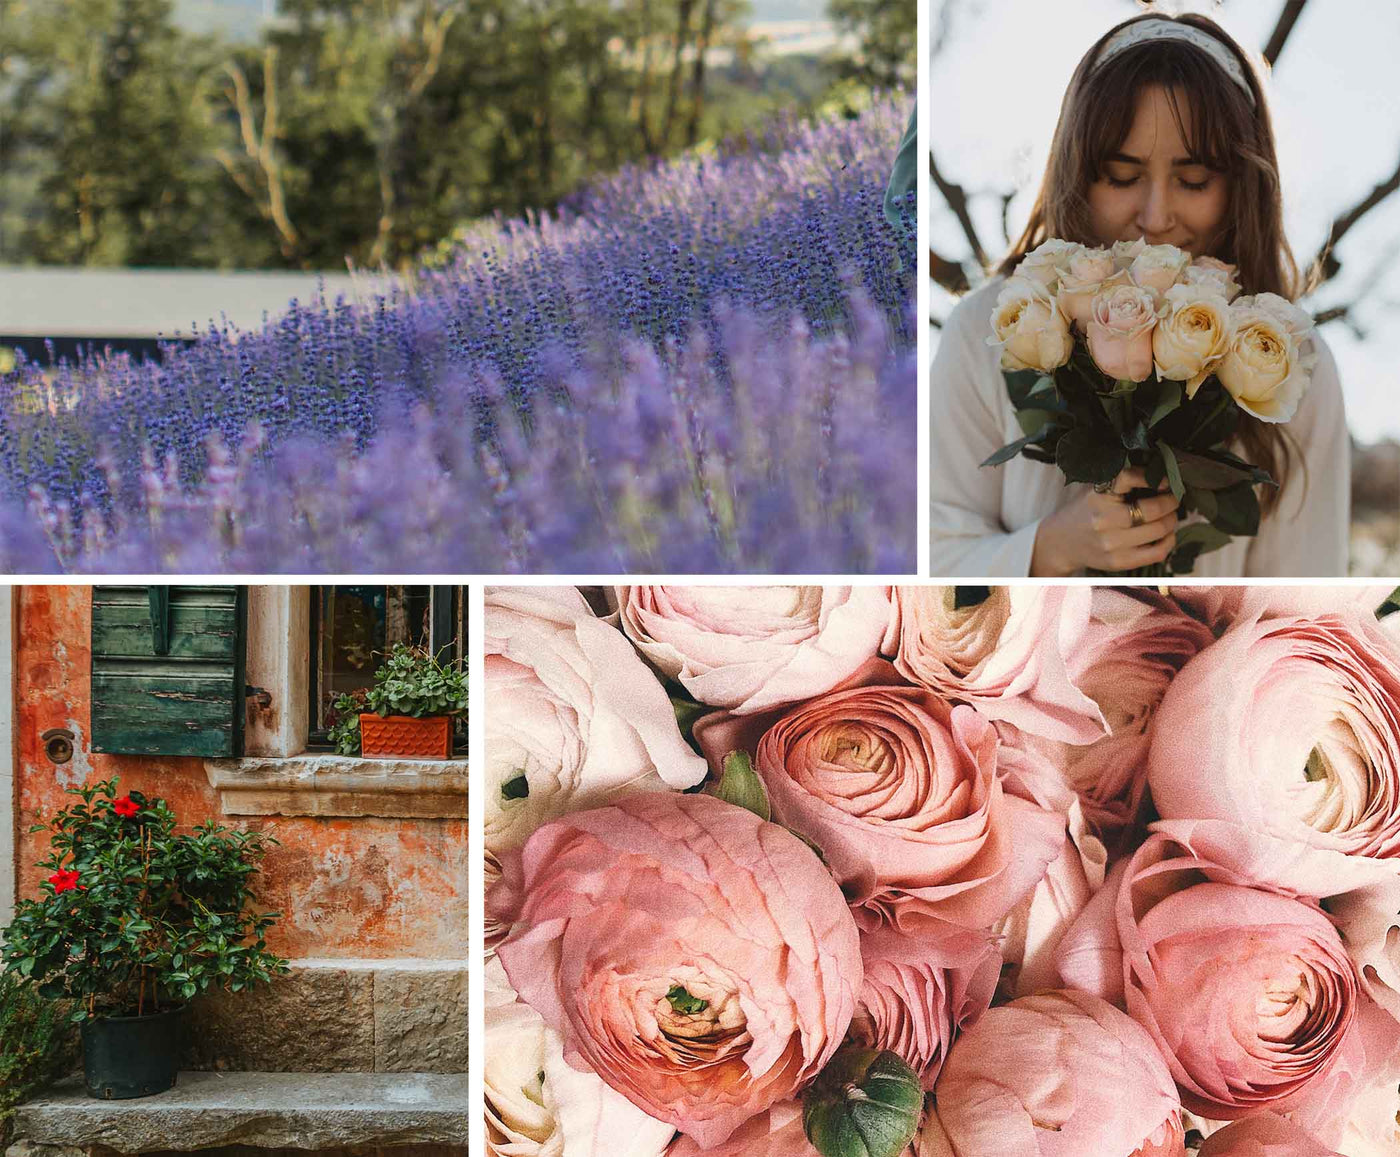 lavender farm, pink roses, roses growing against a wall, and a woman smelling a bouquet of roses 